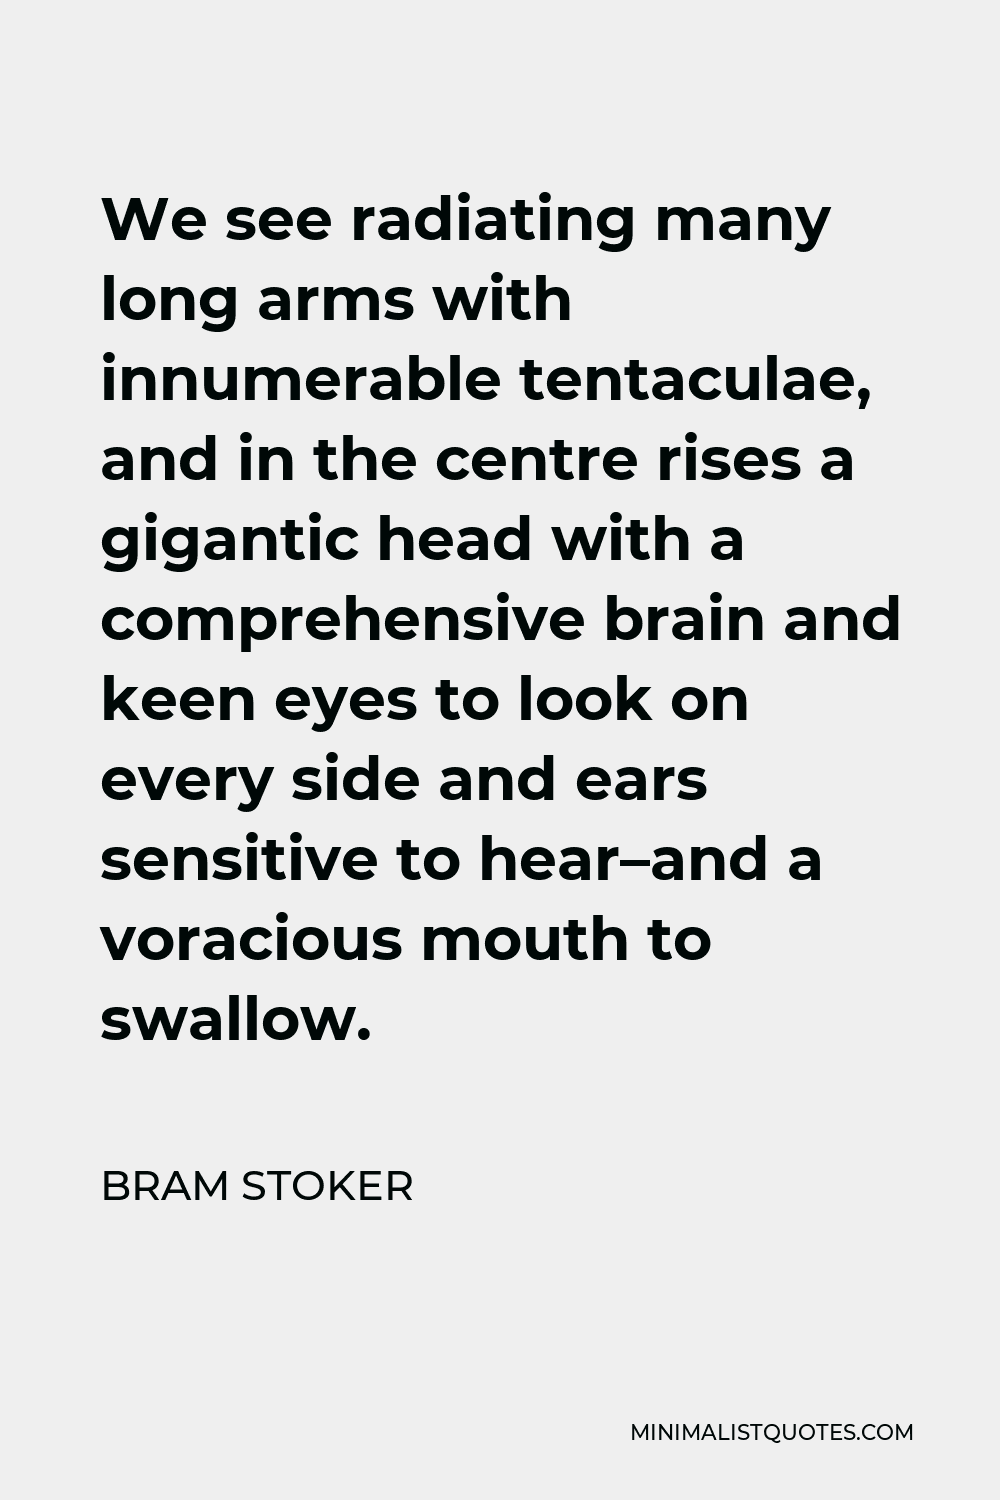 Bram Stoker Quote - We see radiating many long arms with innumerable tentaculae, and in the centre rises a gigantic head with a comprehensive brain and keen eyes to look on every side and ears sensitive to hear–and a voracious mouth to swallow.